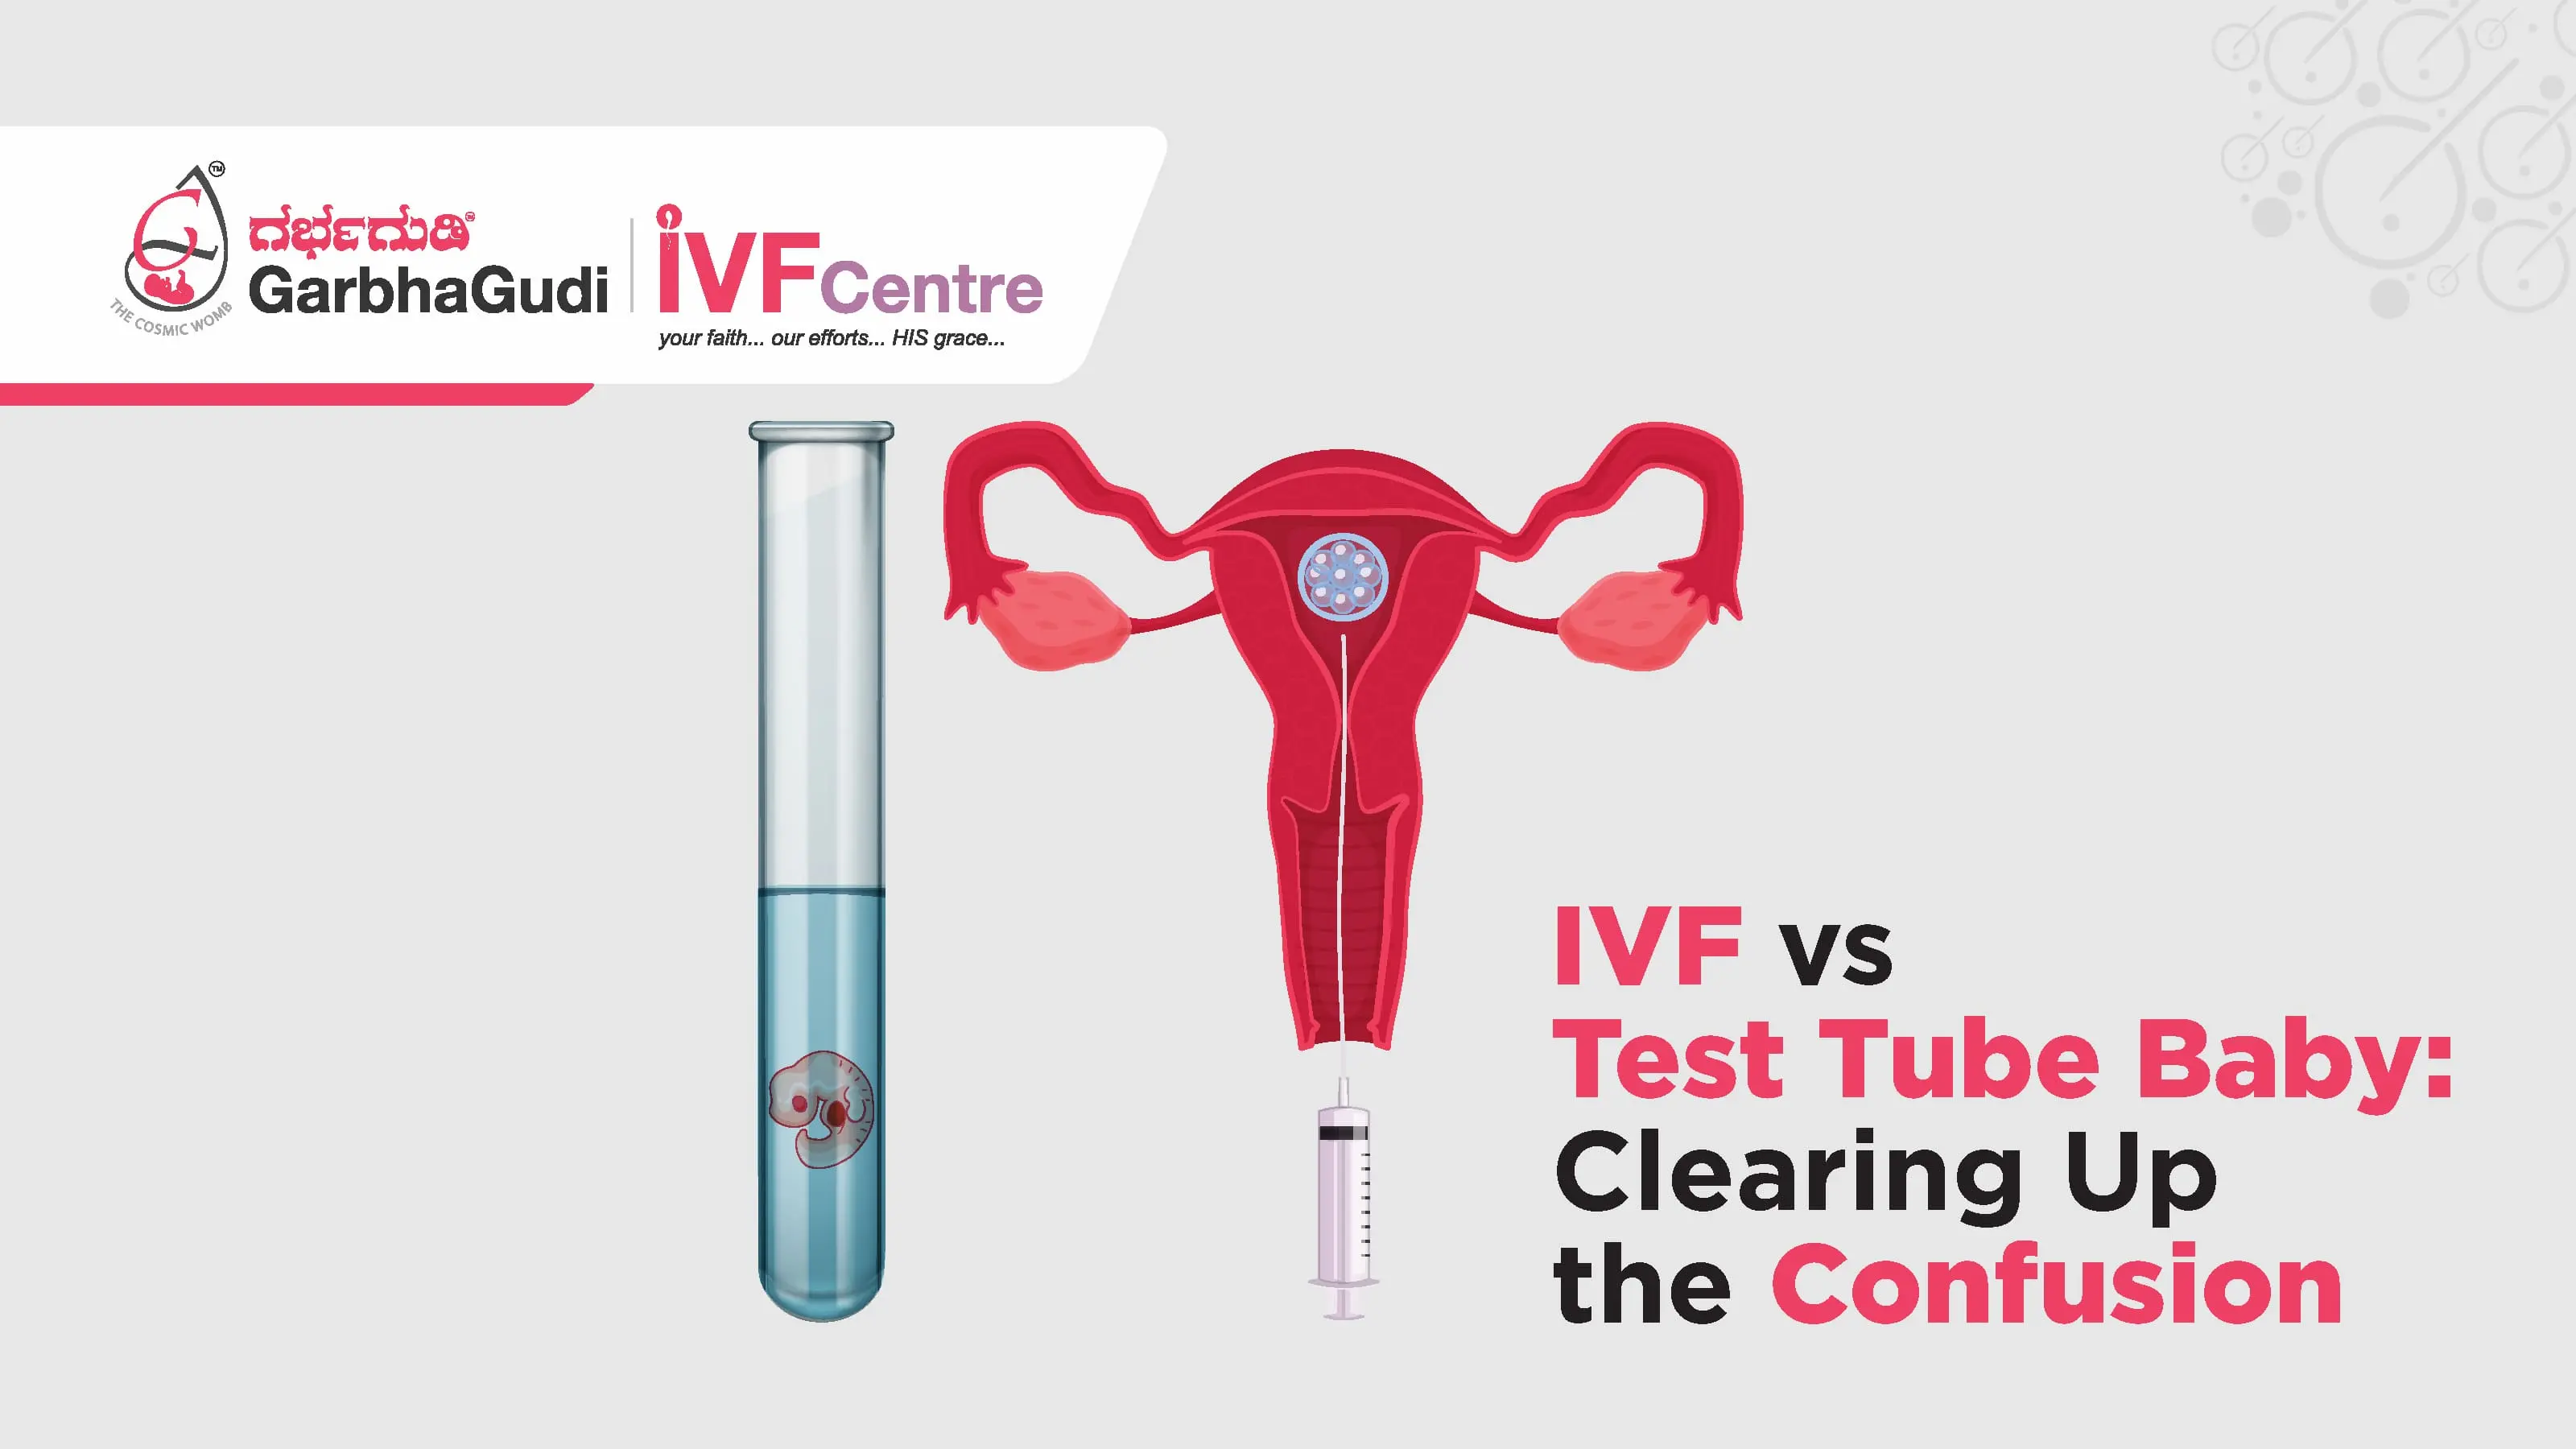 IVF vs Test Tube Baby: Clearing Up the Confusion